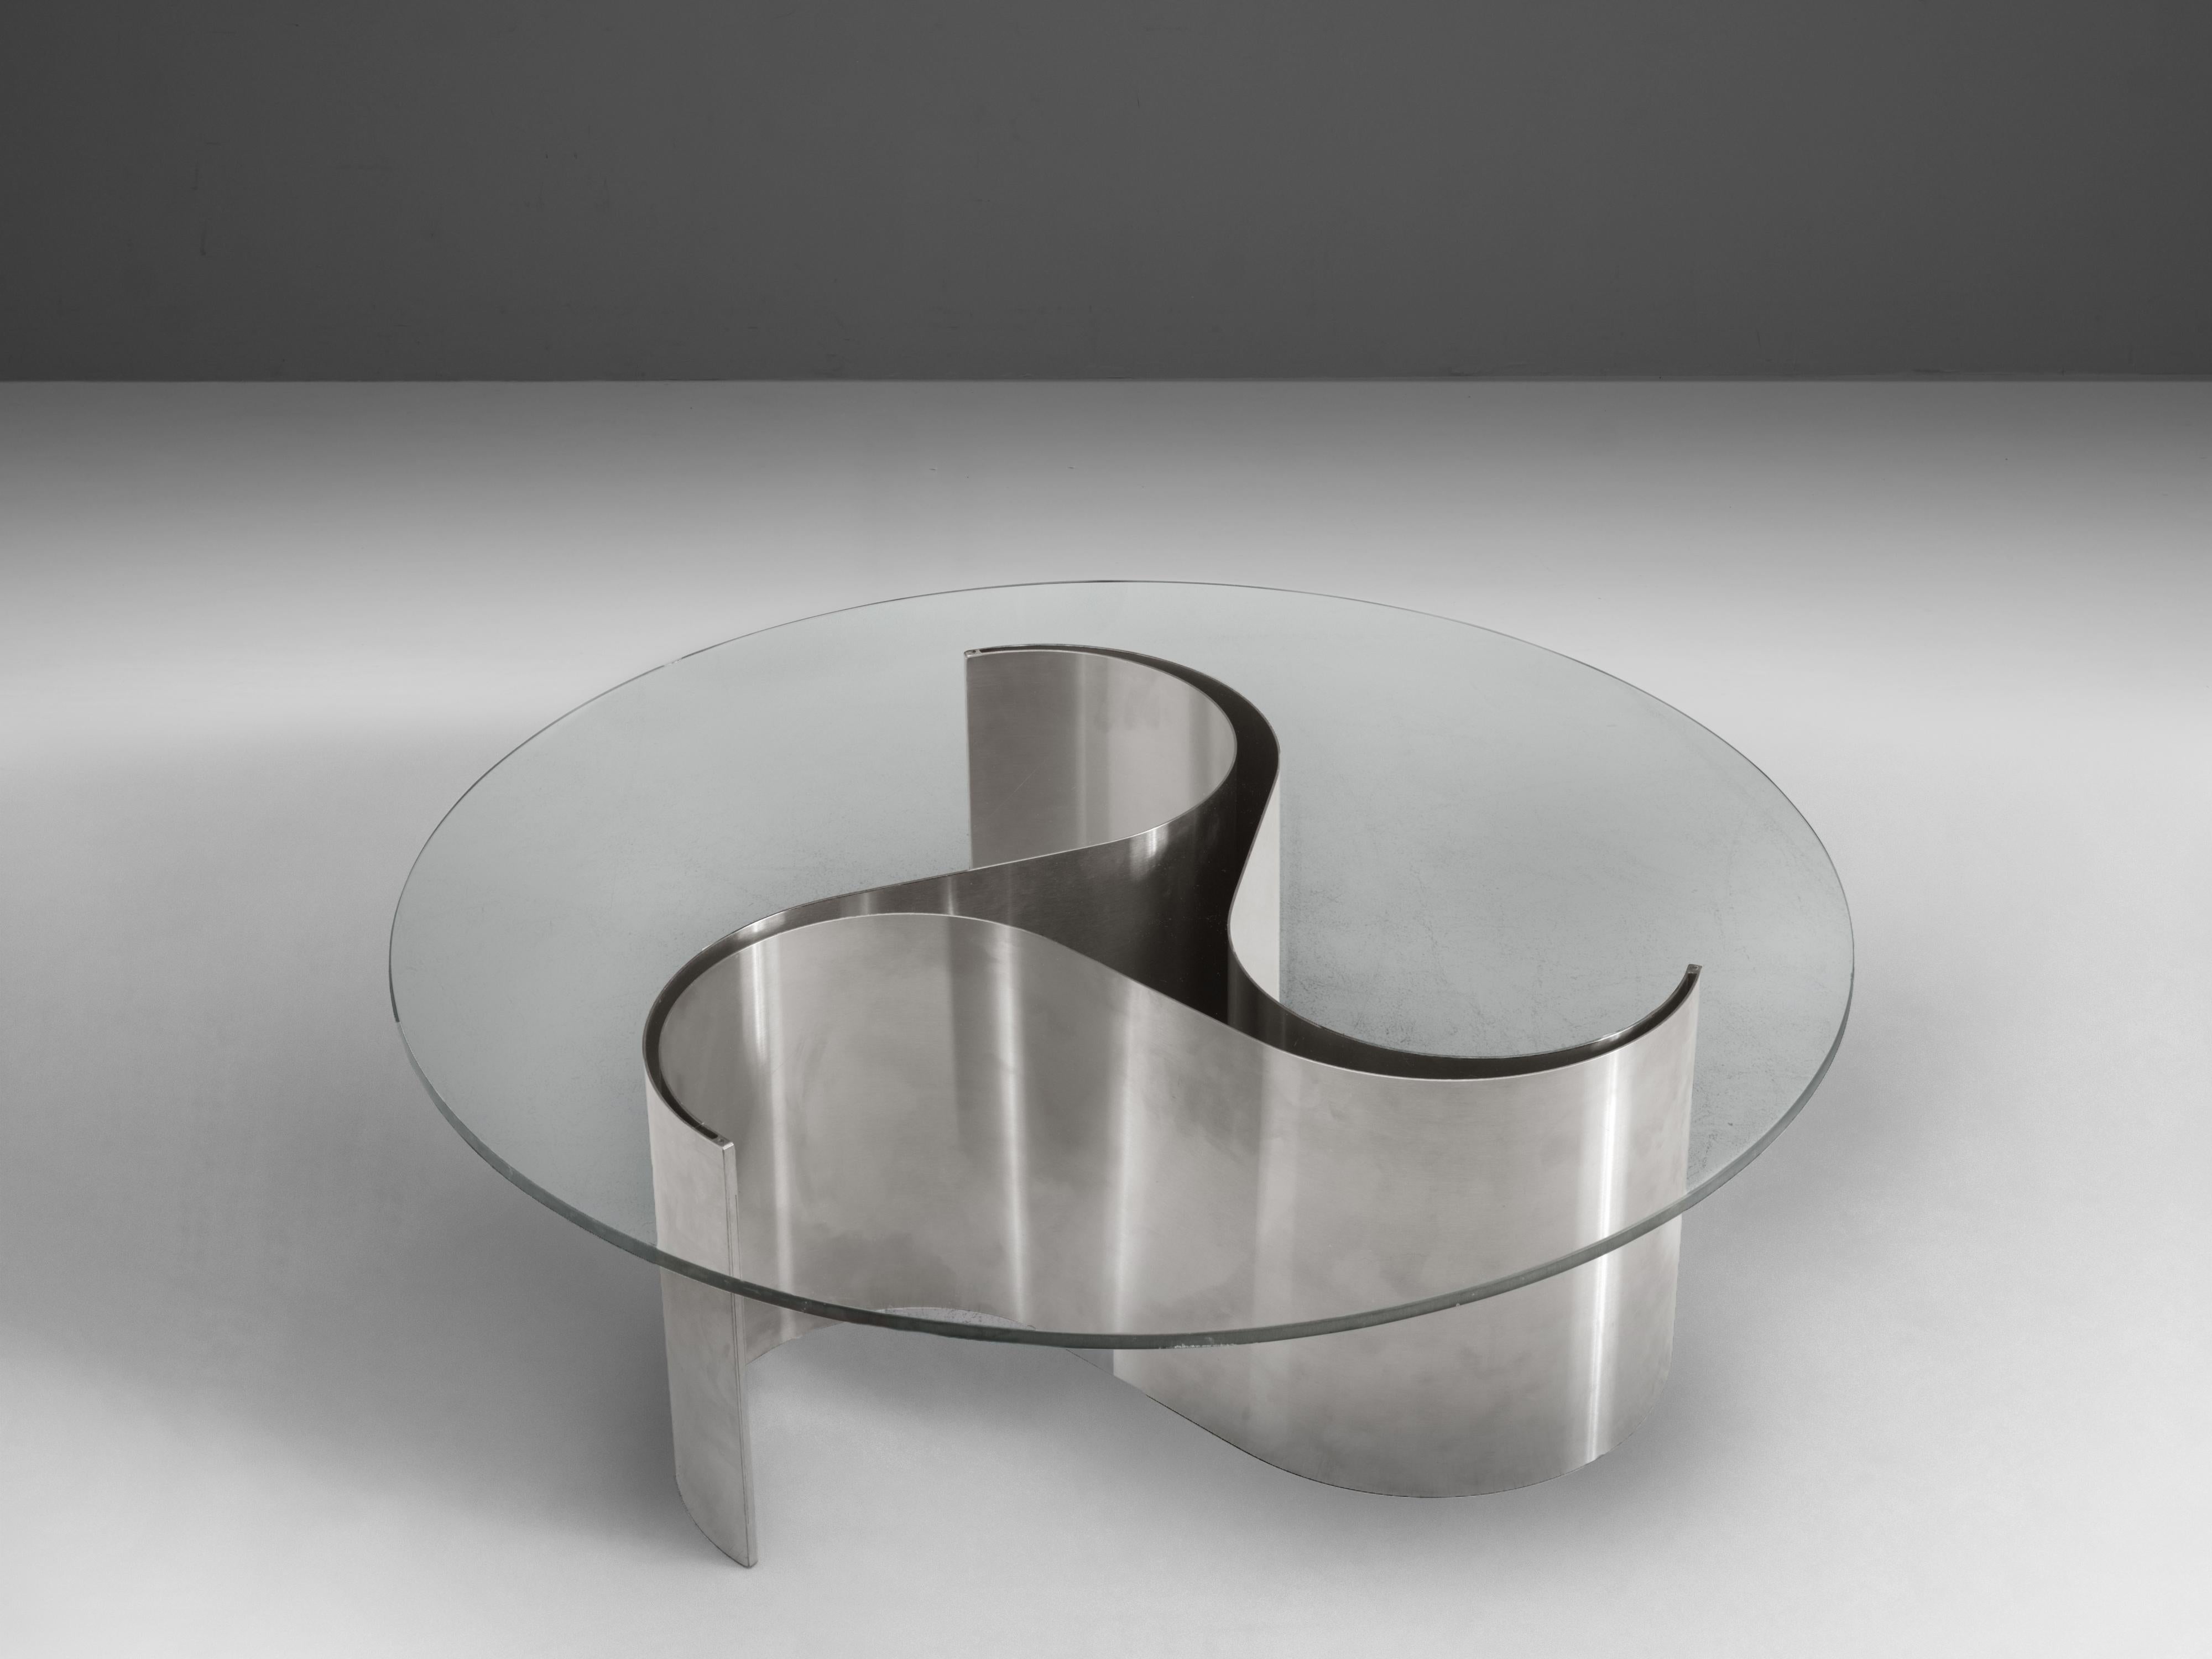 Patrice Maffei for Kappa, coffee table 'Comète', glass, stainless steel, France, 1970s

The 'Comète' coffee table by French designer Patrice Maffei shows a dynamic base made of stainless steel. Due to the visual characteristics of the stainless